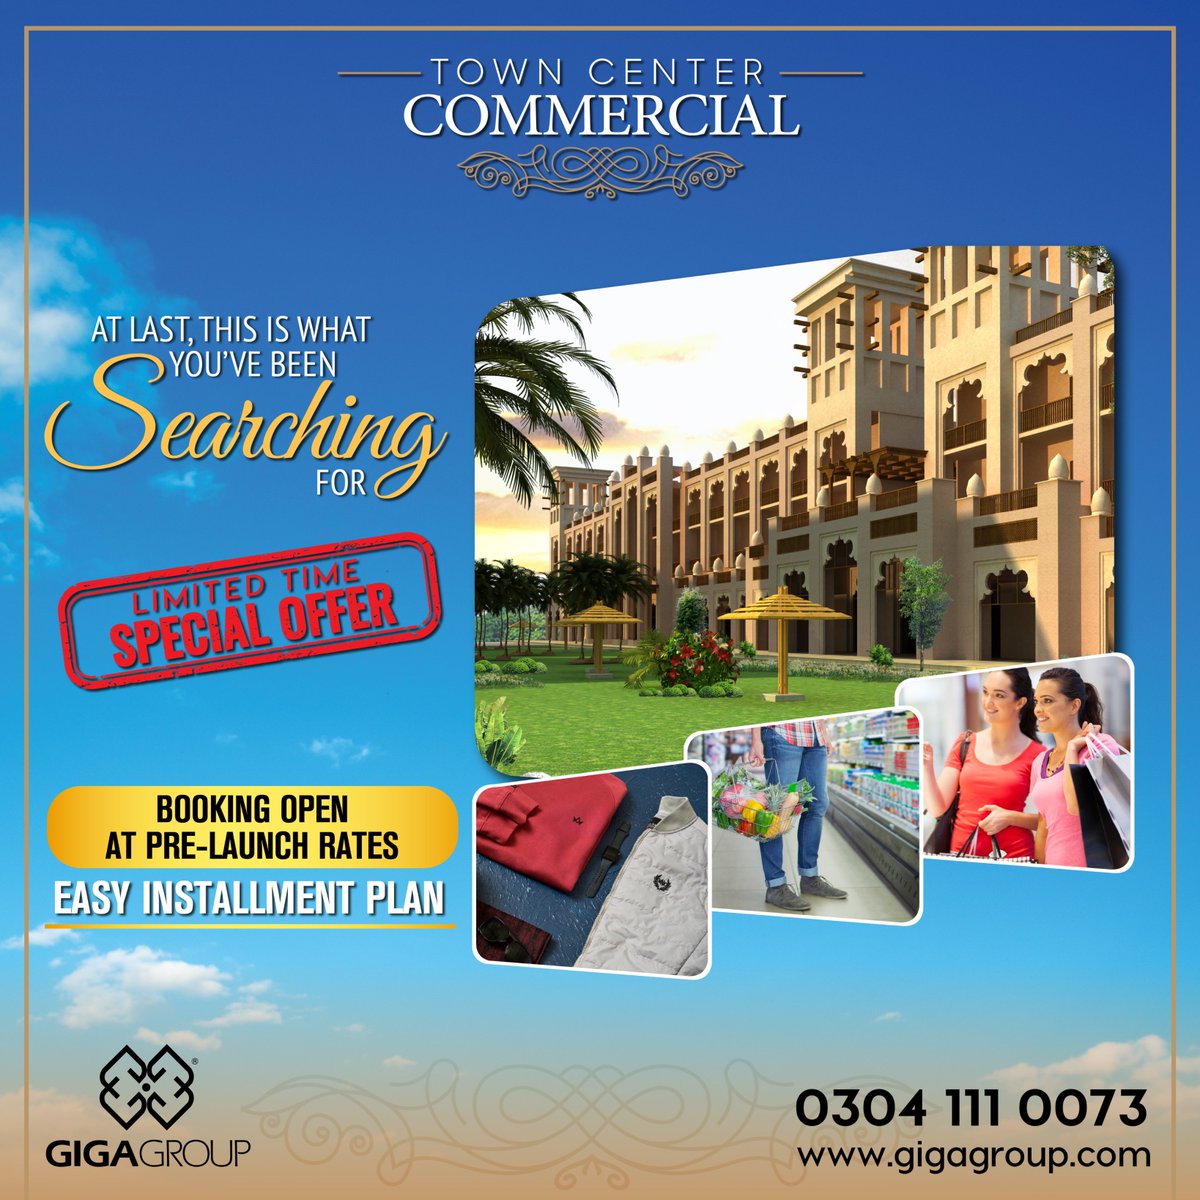 Be quick to invest in commercial shops in DHA Phase II Islamabad, which are available on an easy instalment plan. 
Rates are going to 𝙞𝙣𝙘𝙧𝙚𝙖𝙨𝙚 very soon!

#gigagroup #towncentercommercial #commercialshops  #specialdiscountedoffer #bookingopen #booknow #offer #DHAIslamabad